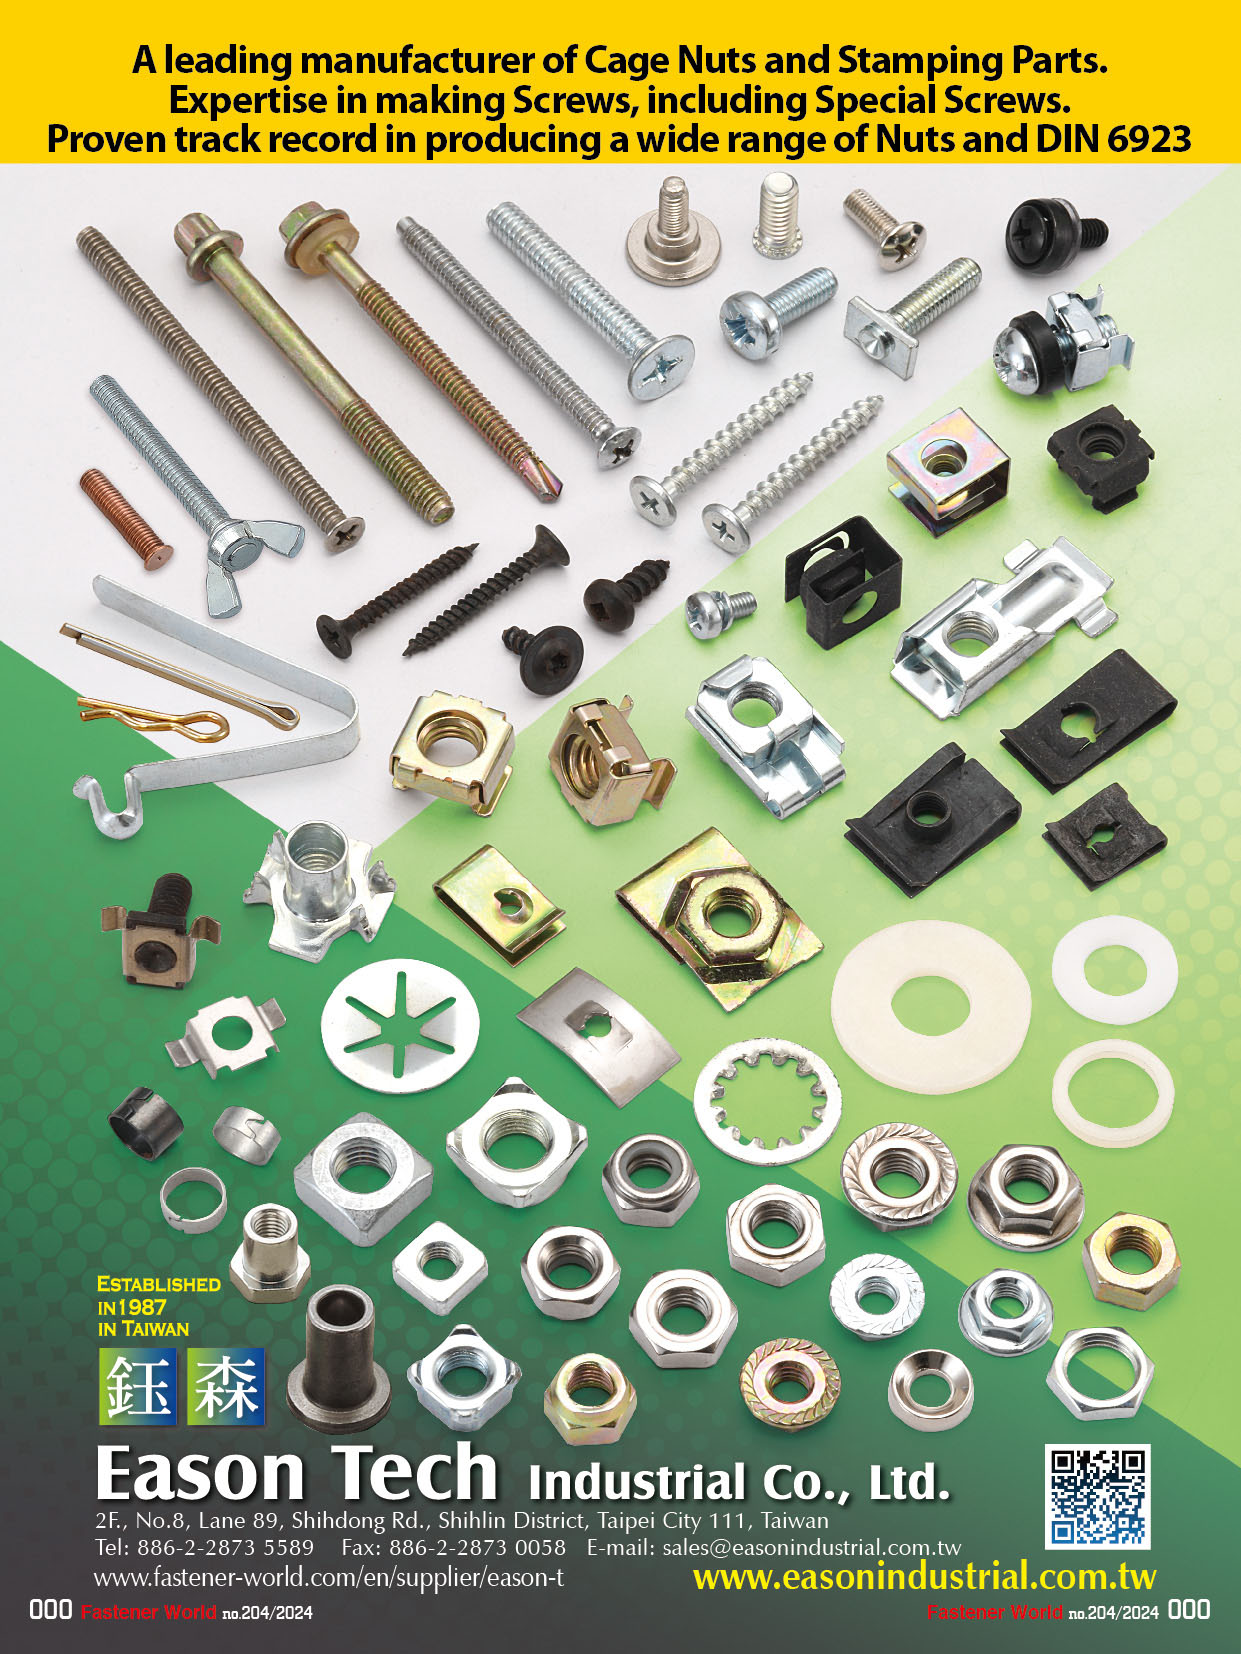 EASON TECH INDUSTRIAL CO., LTD.  , Cage Nuts, Spring Nuts, U Type Steel, J Type Steel, Counter Nut, Nylon Washer, Tee-Nuts for office furniture, Stamping, Tooling, Special Screws or Bolts, Pipe Plug